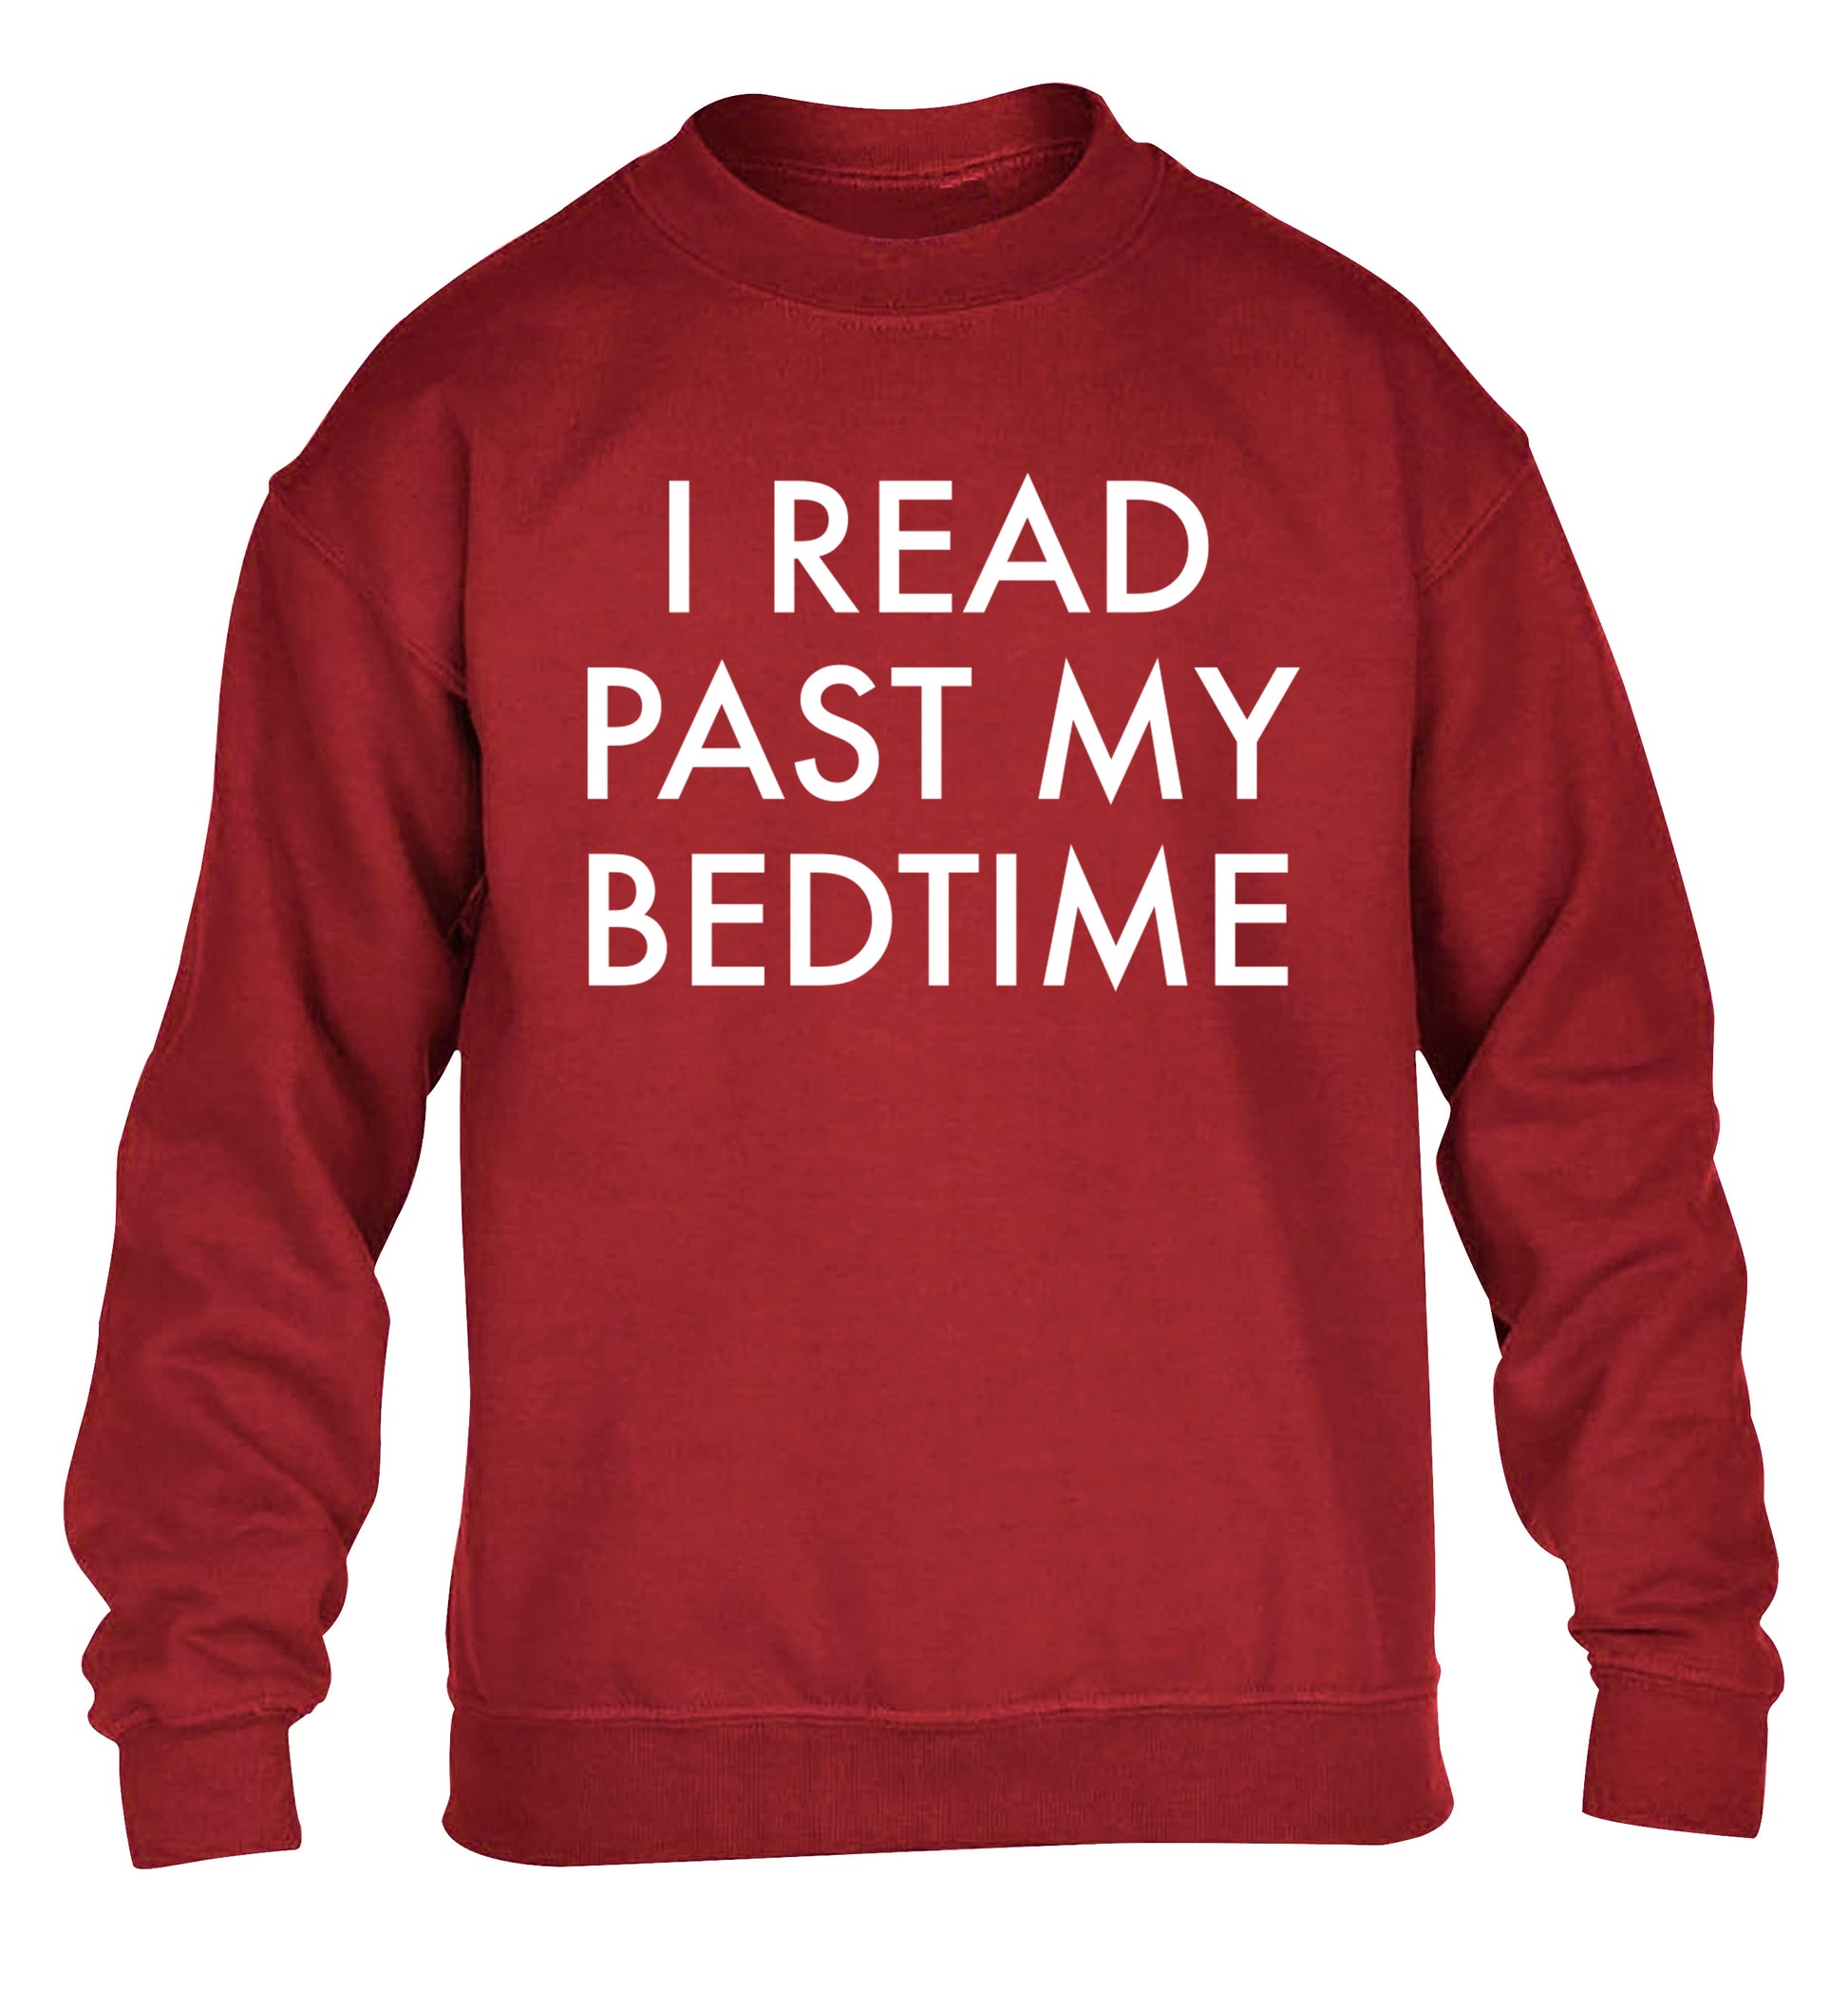 I read past my bedtime children's grey sweater 12-14 Years